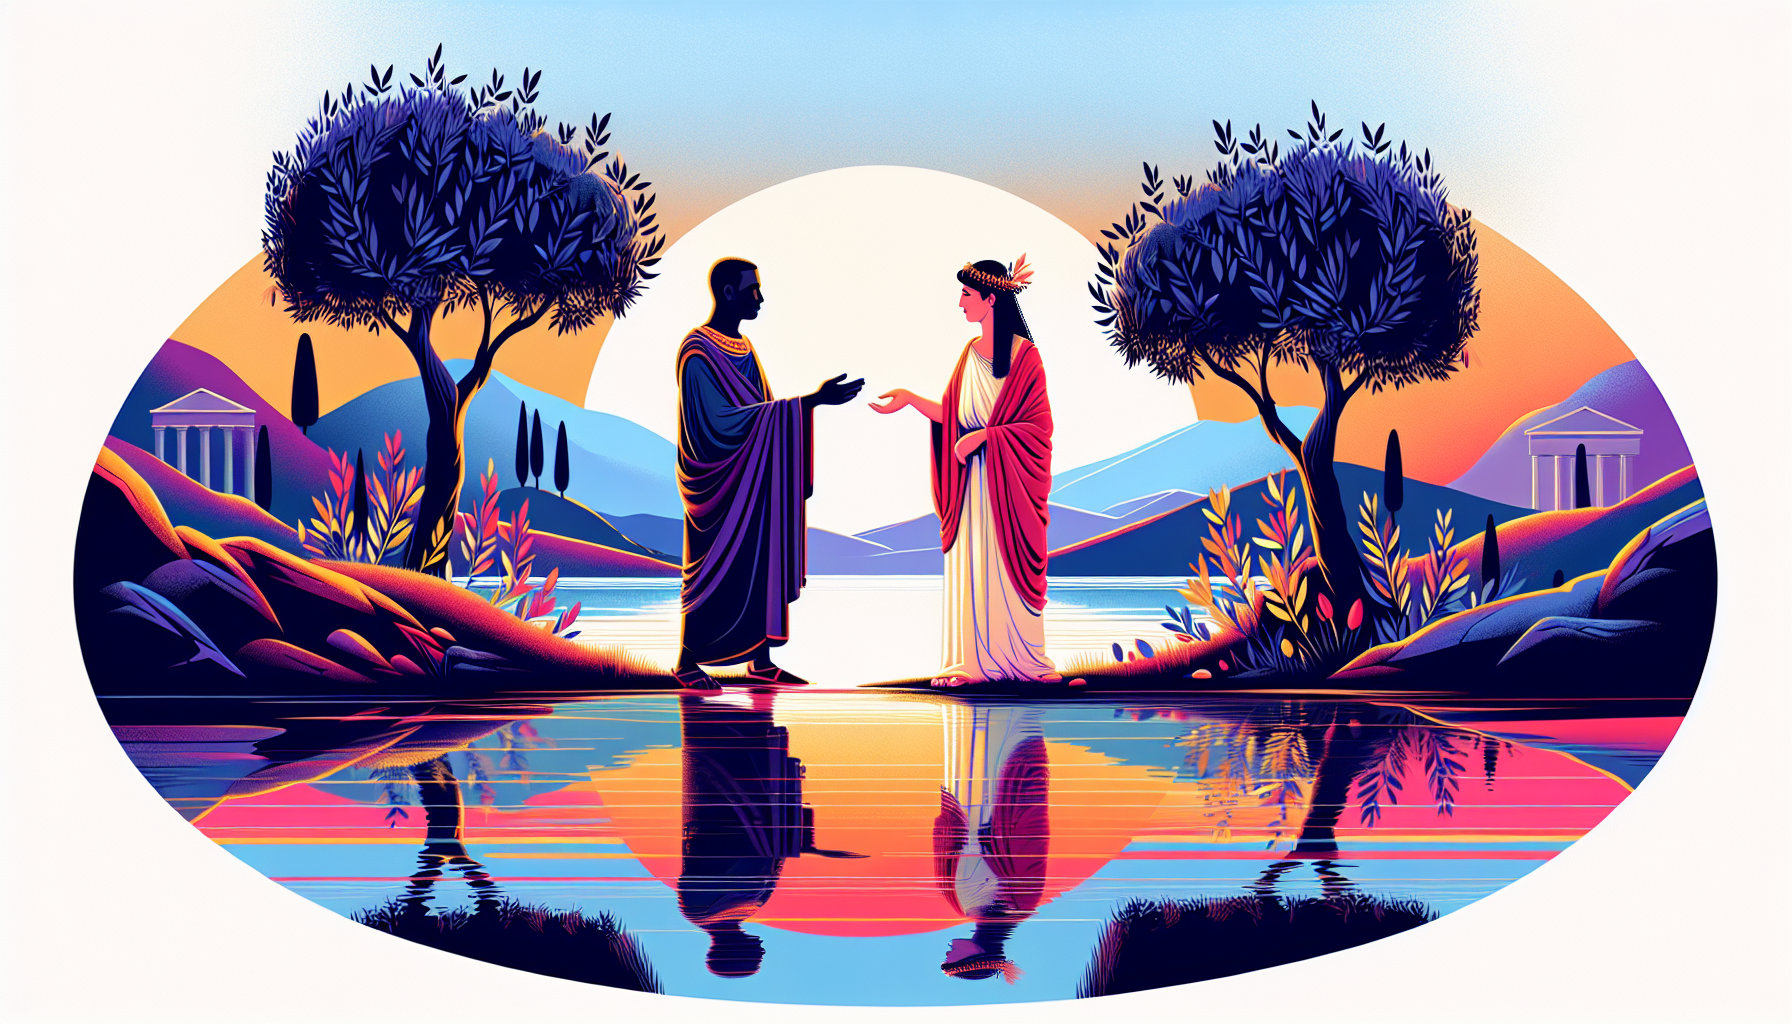 Peaceful landscape depicting a serene lake reflecting a vibrant sunrise, with two figures in ancient Roman attire standing on the shore, discussing with gentle gestures, surrounded by olive trees, sym